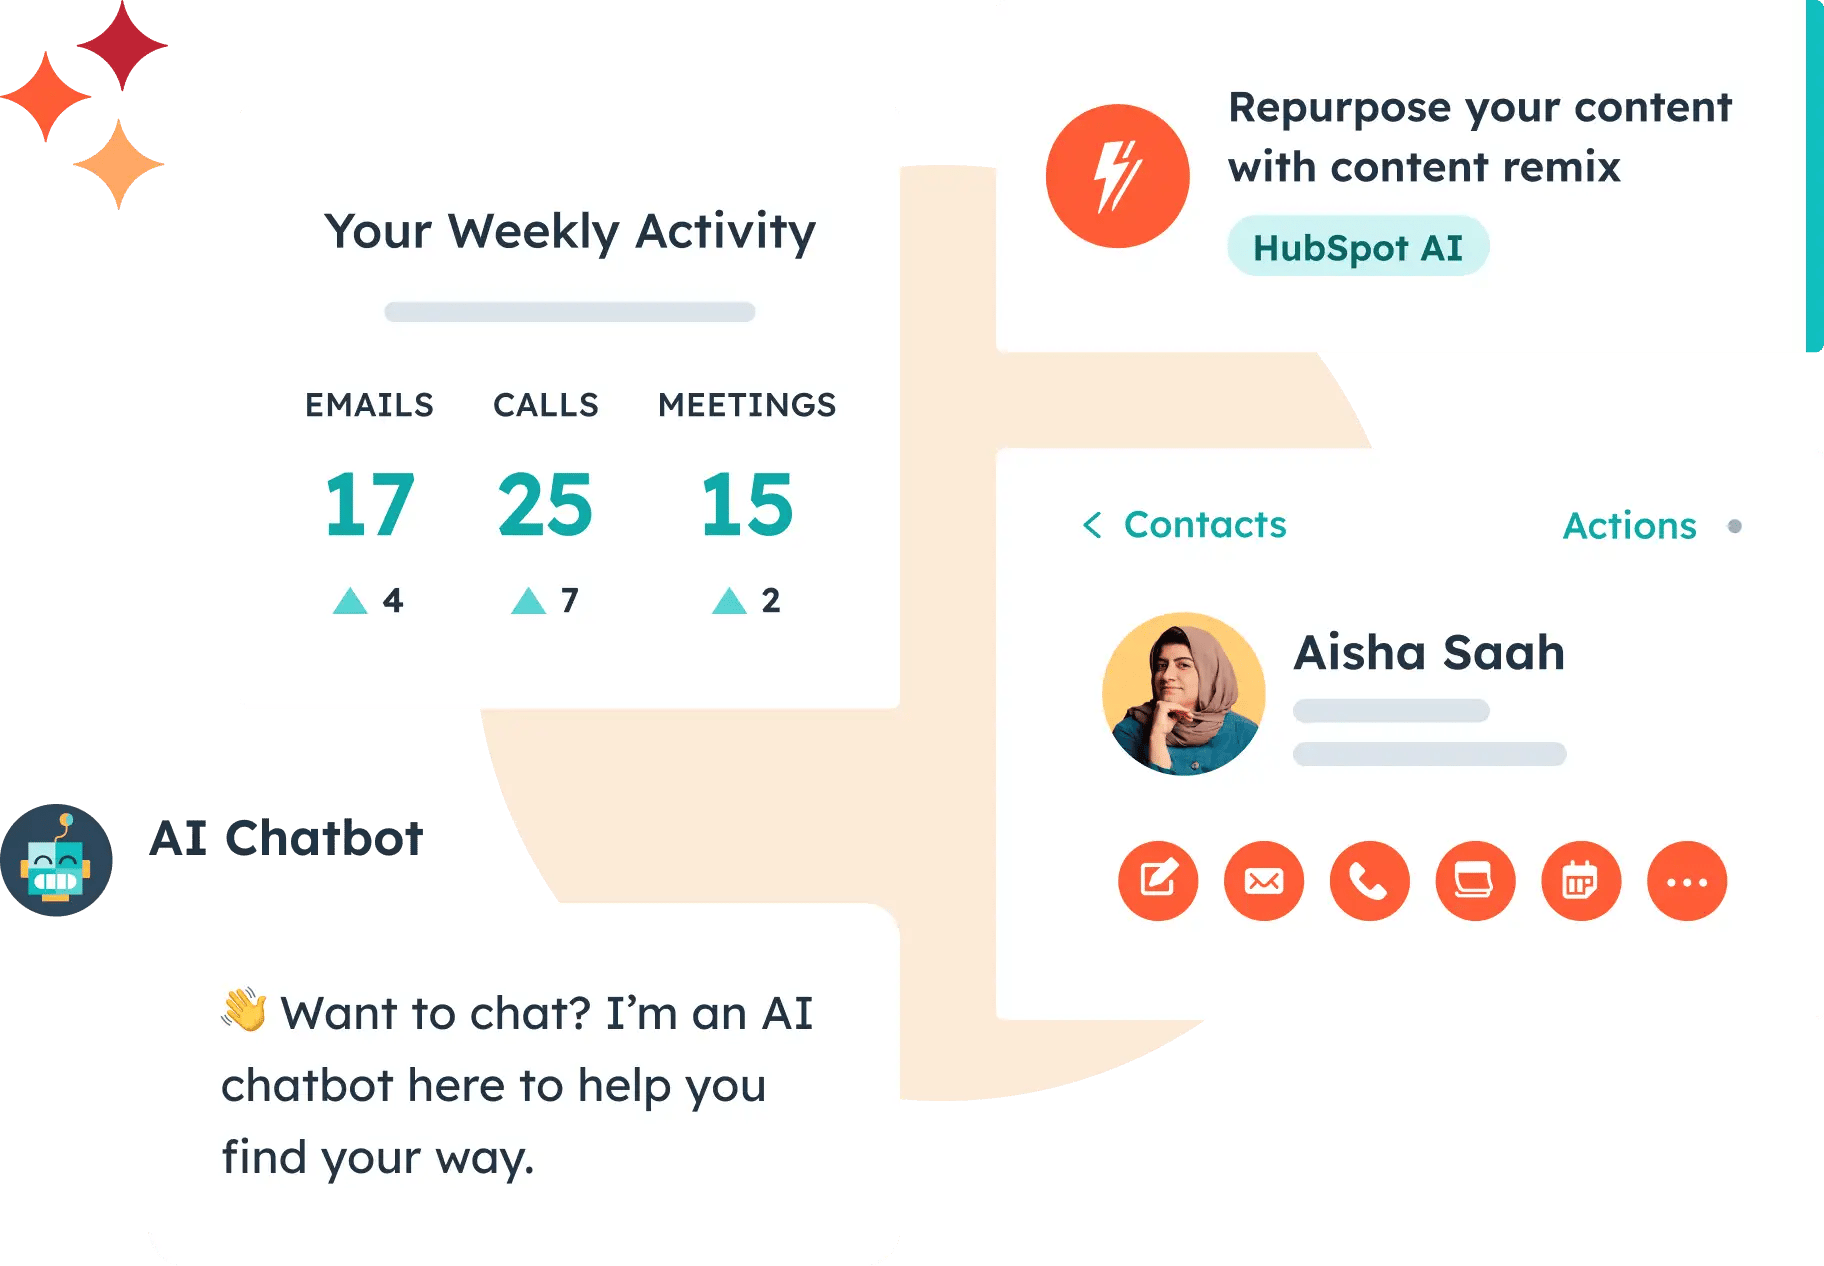 HubSpot interfaces showing Your Weekly Activity with email, call, and meeting counts. Repurpose your content with Content Remix and HubSpot AI. AI Chatbot 